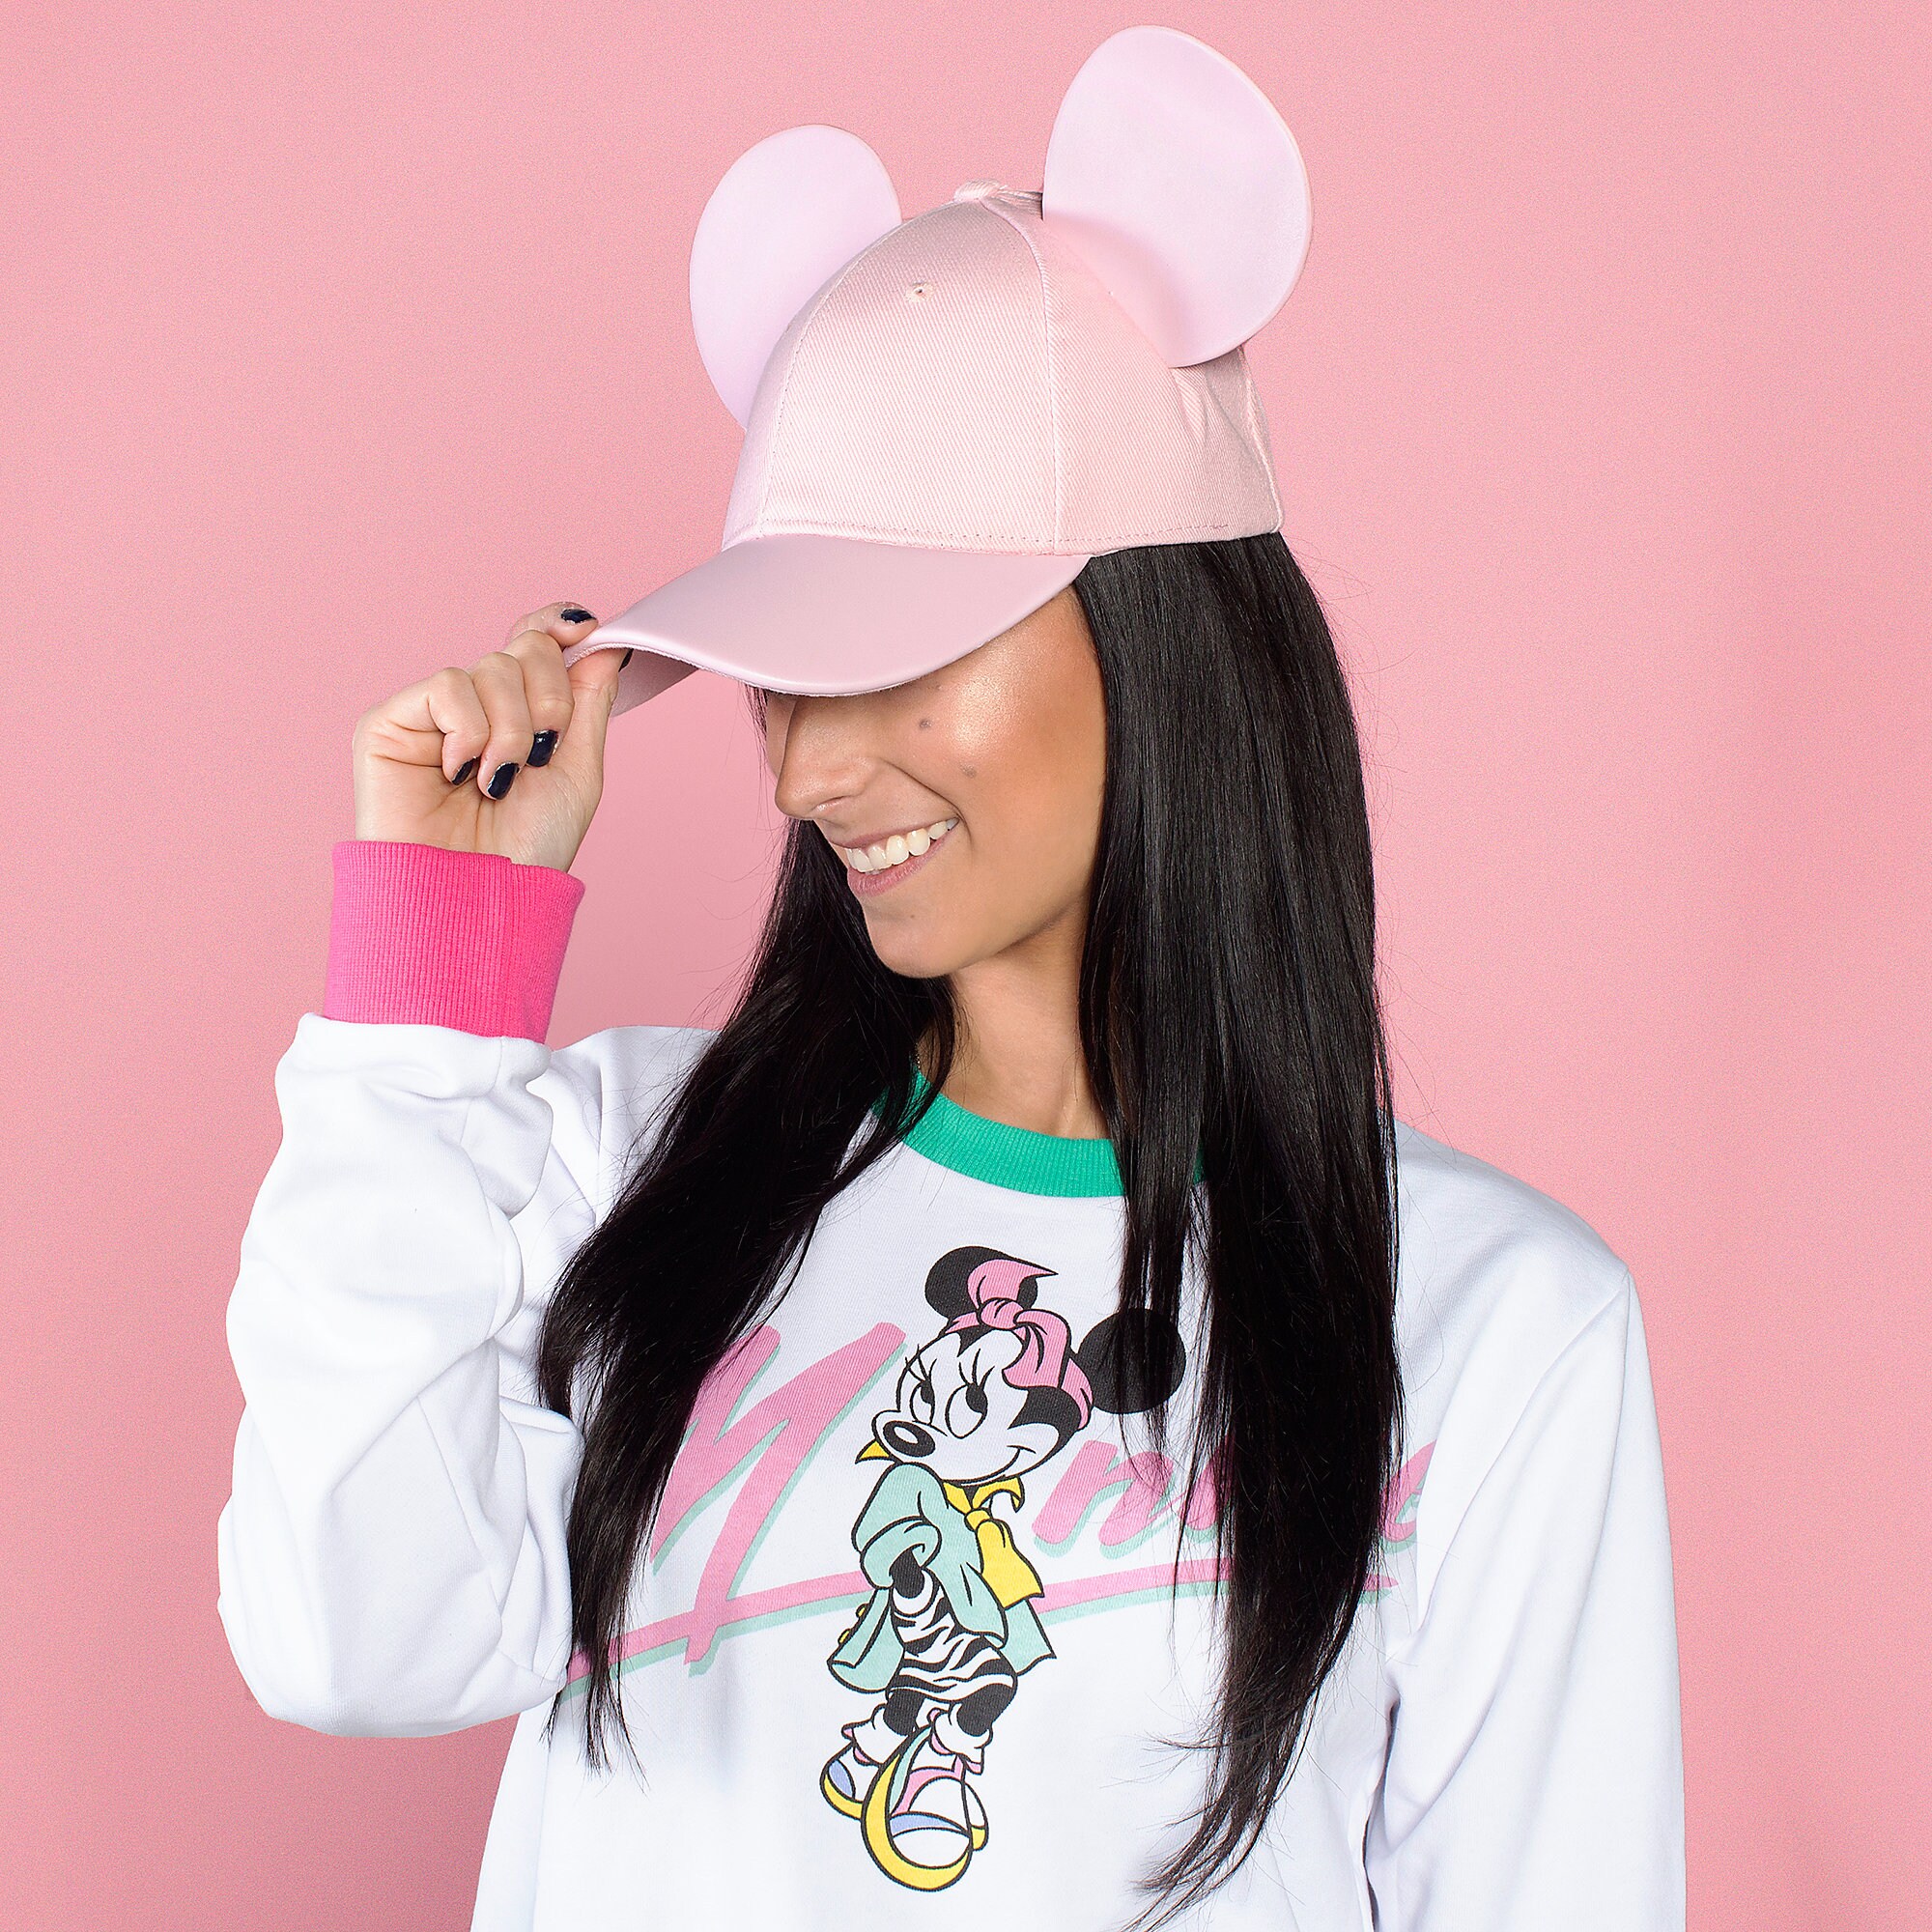 Mickey Mouse Ears Baseball Cap for Adults by Cakeworthy